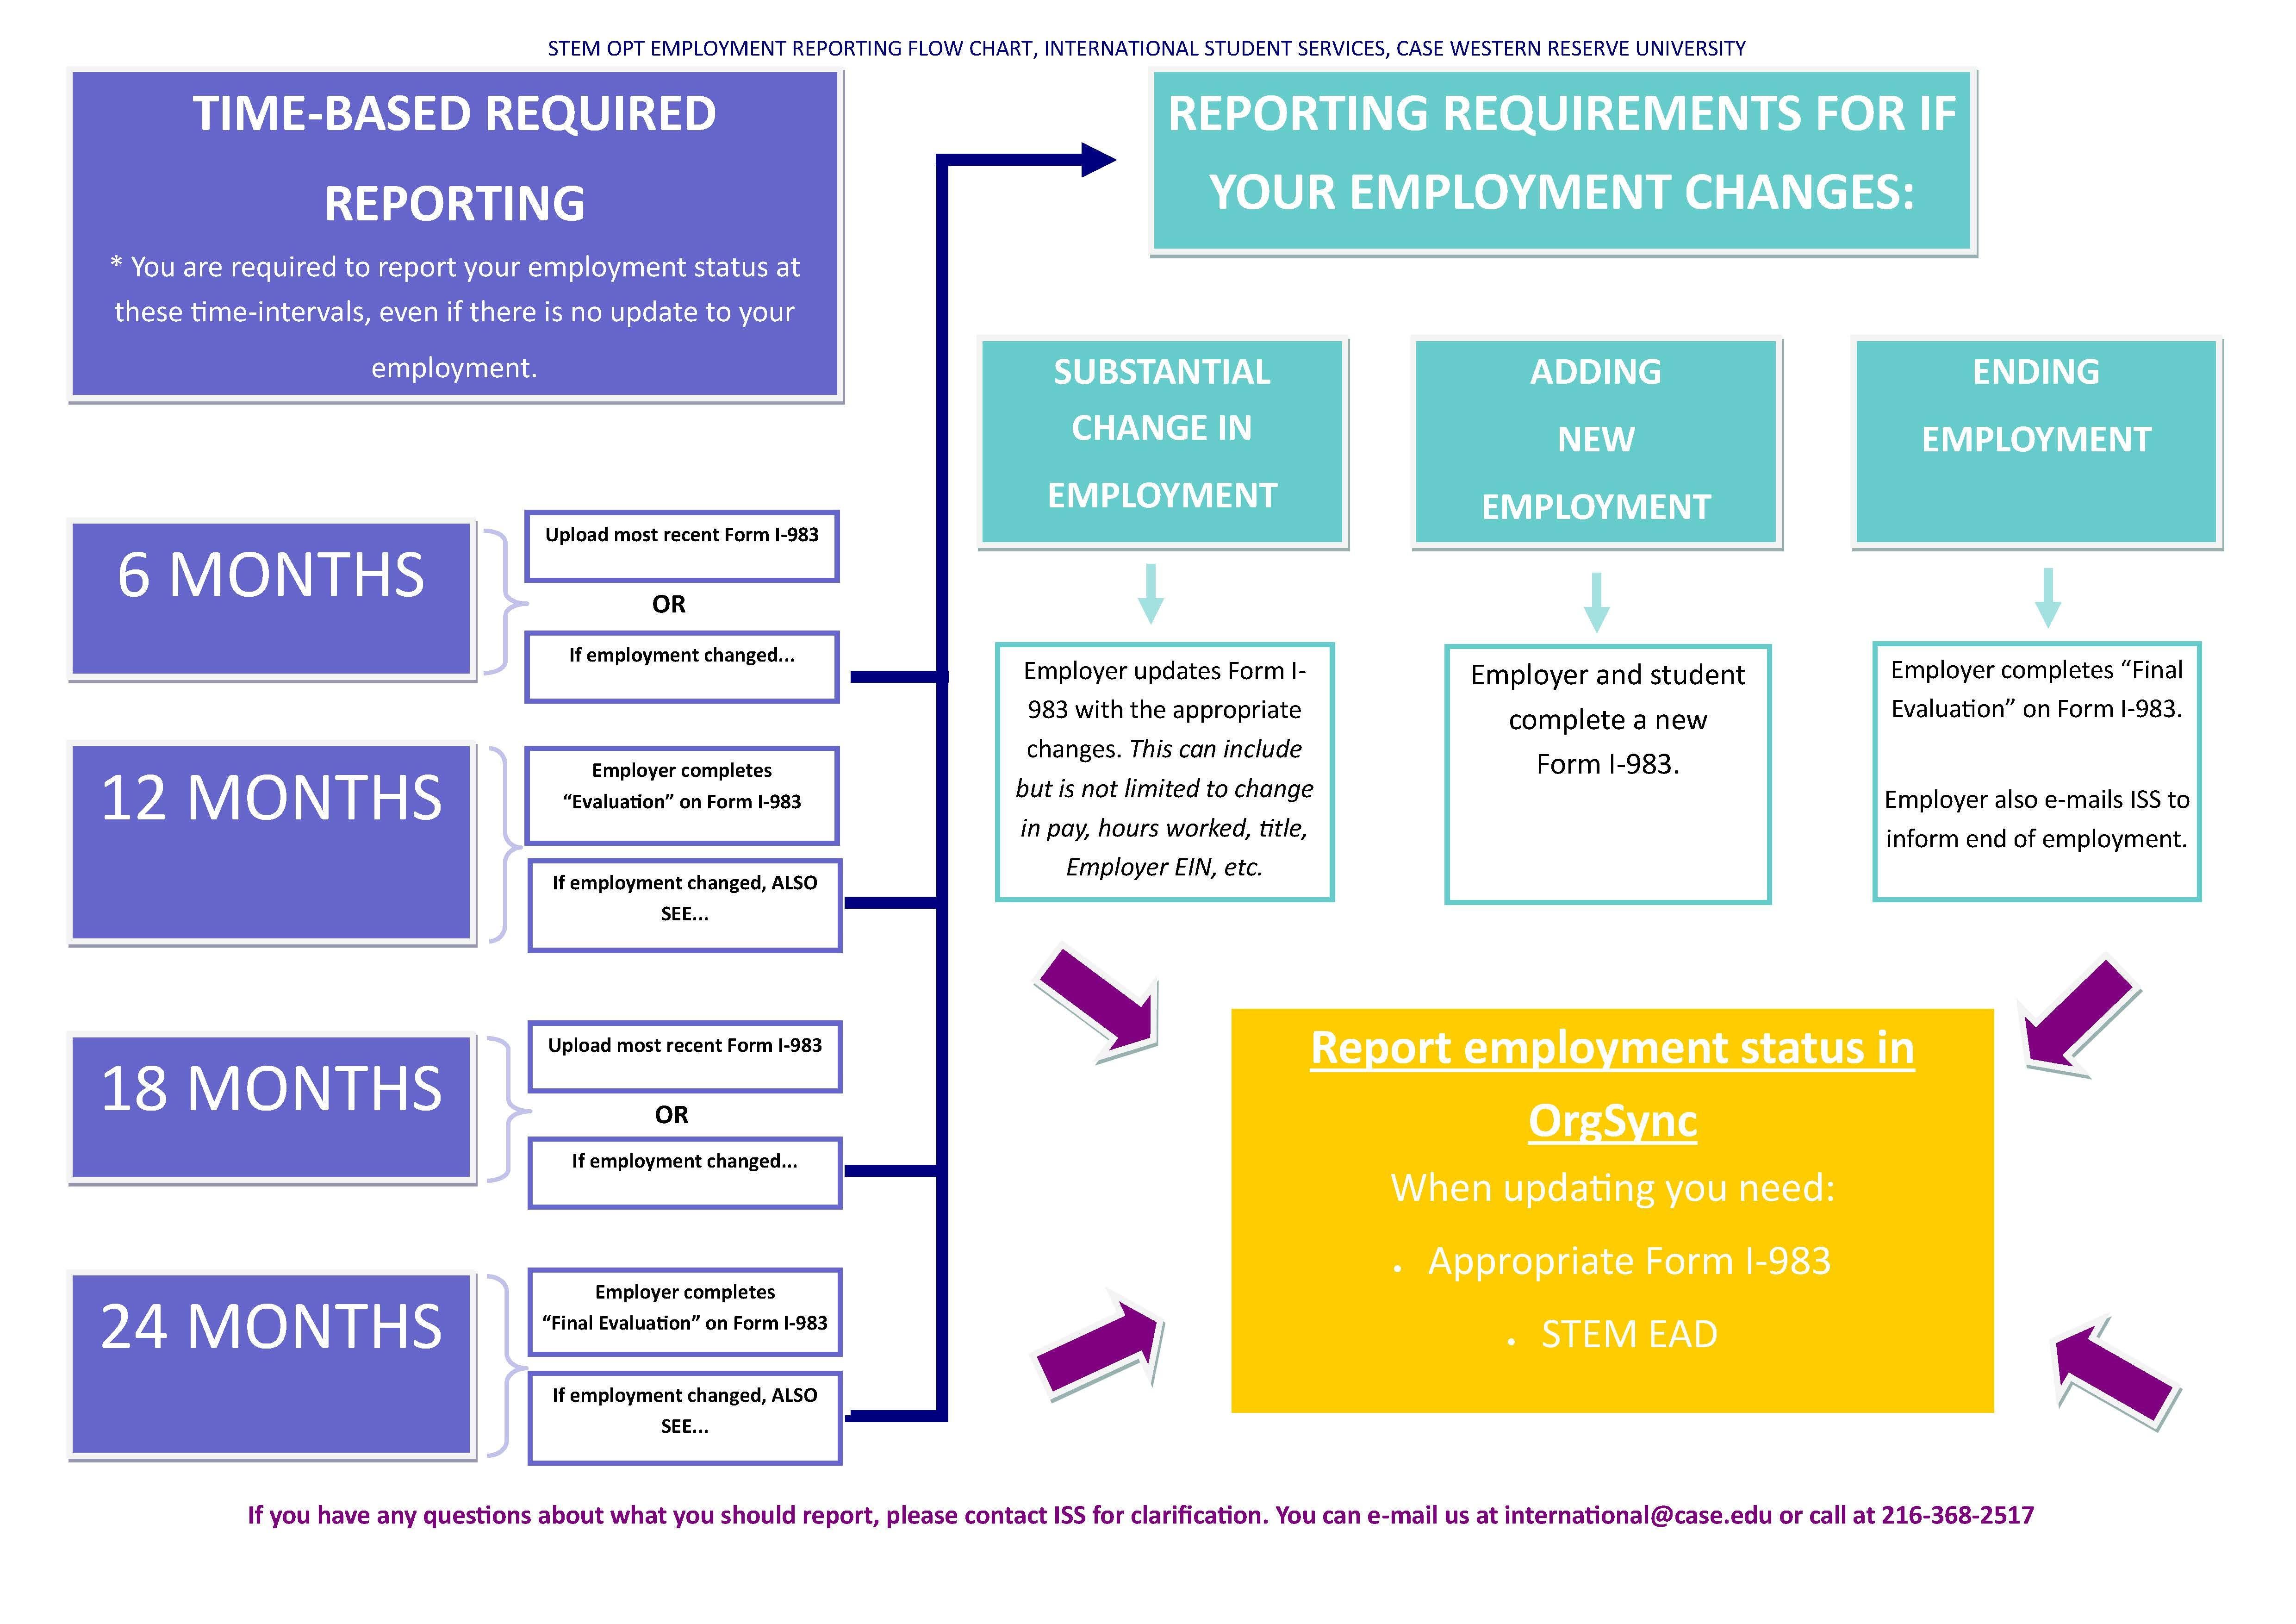 STEM OPT Flow Chart of Reporting Requirements